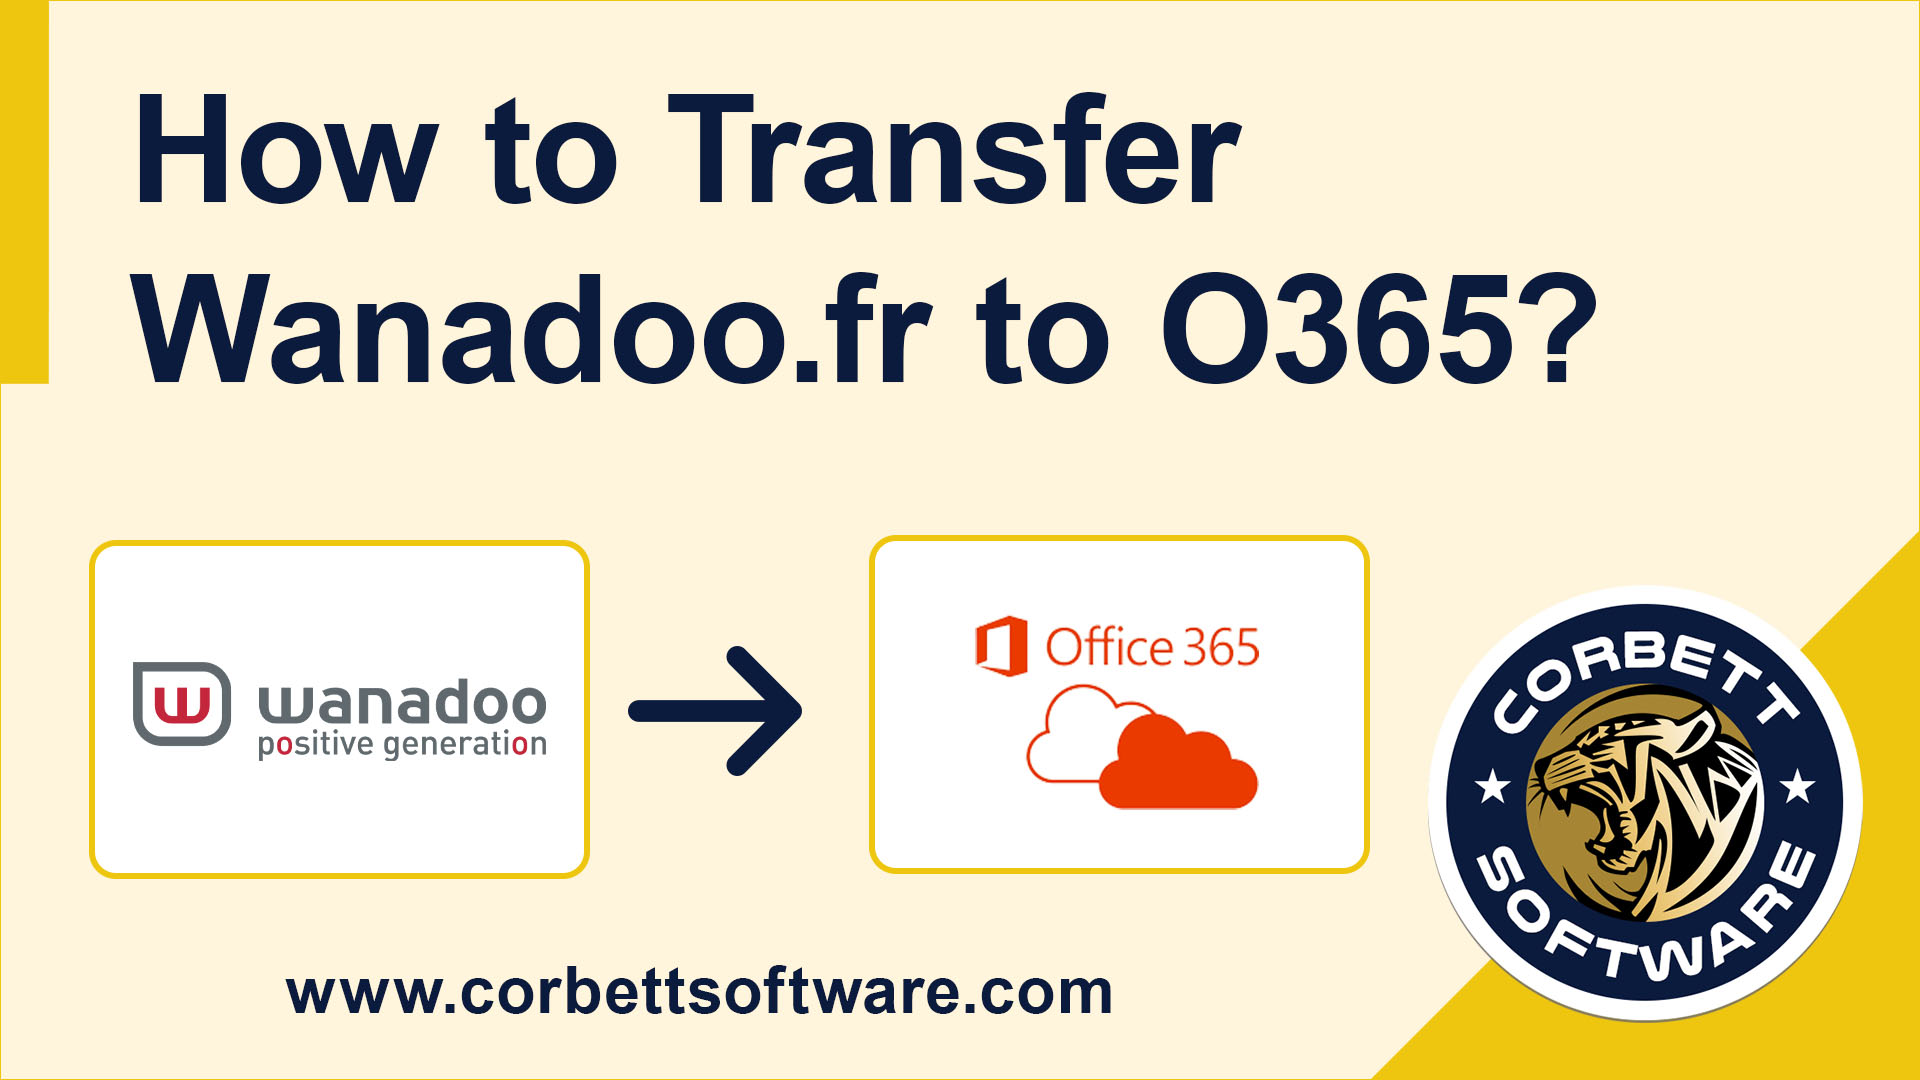 Transfer Wanadoo.fr Email to Office 365